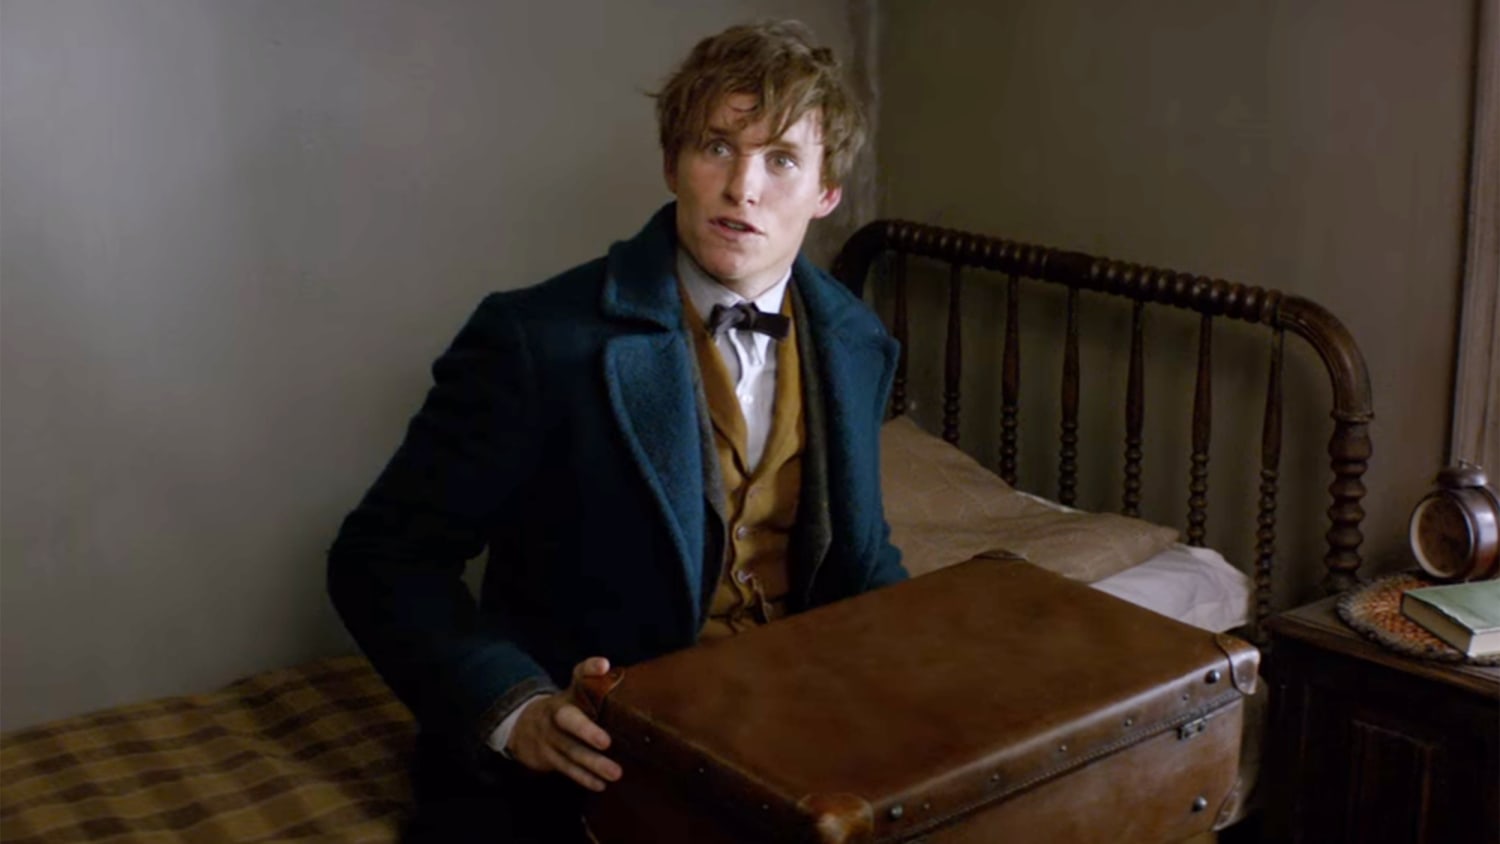 Fantastic Beasts And Where To Find Them Book